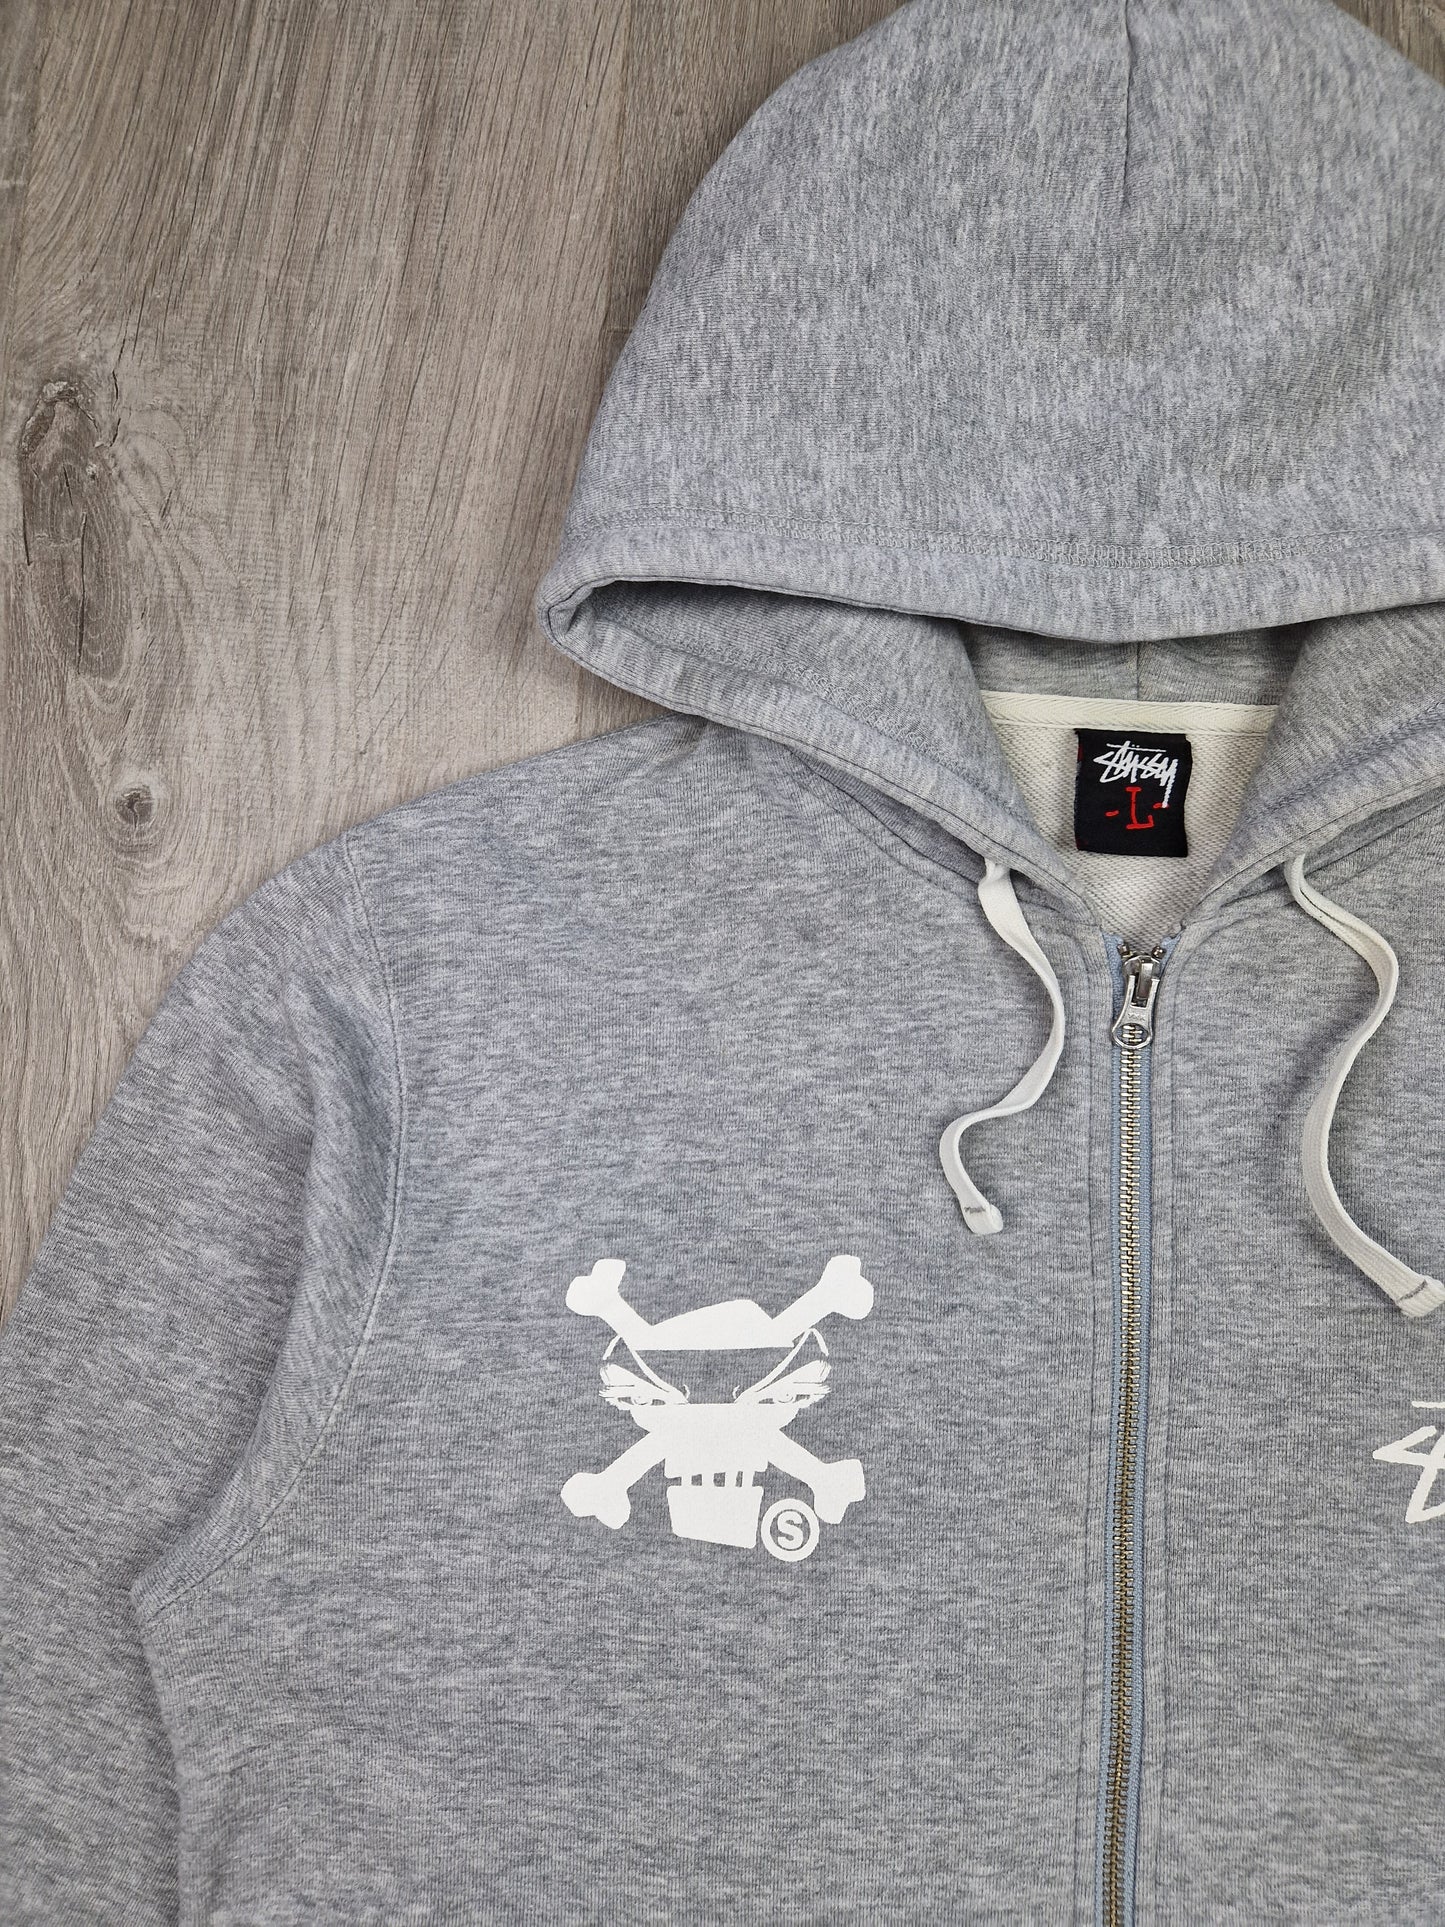 Vintage Stussy x Battle Axes limited edition hoodie (L/M)